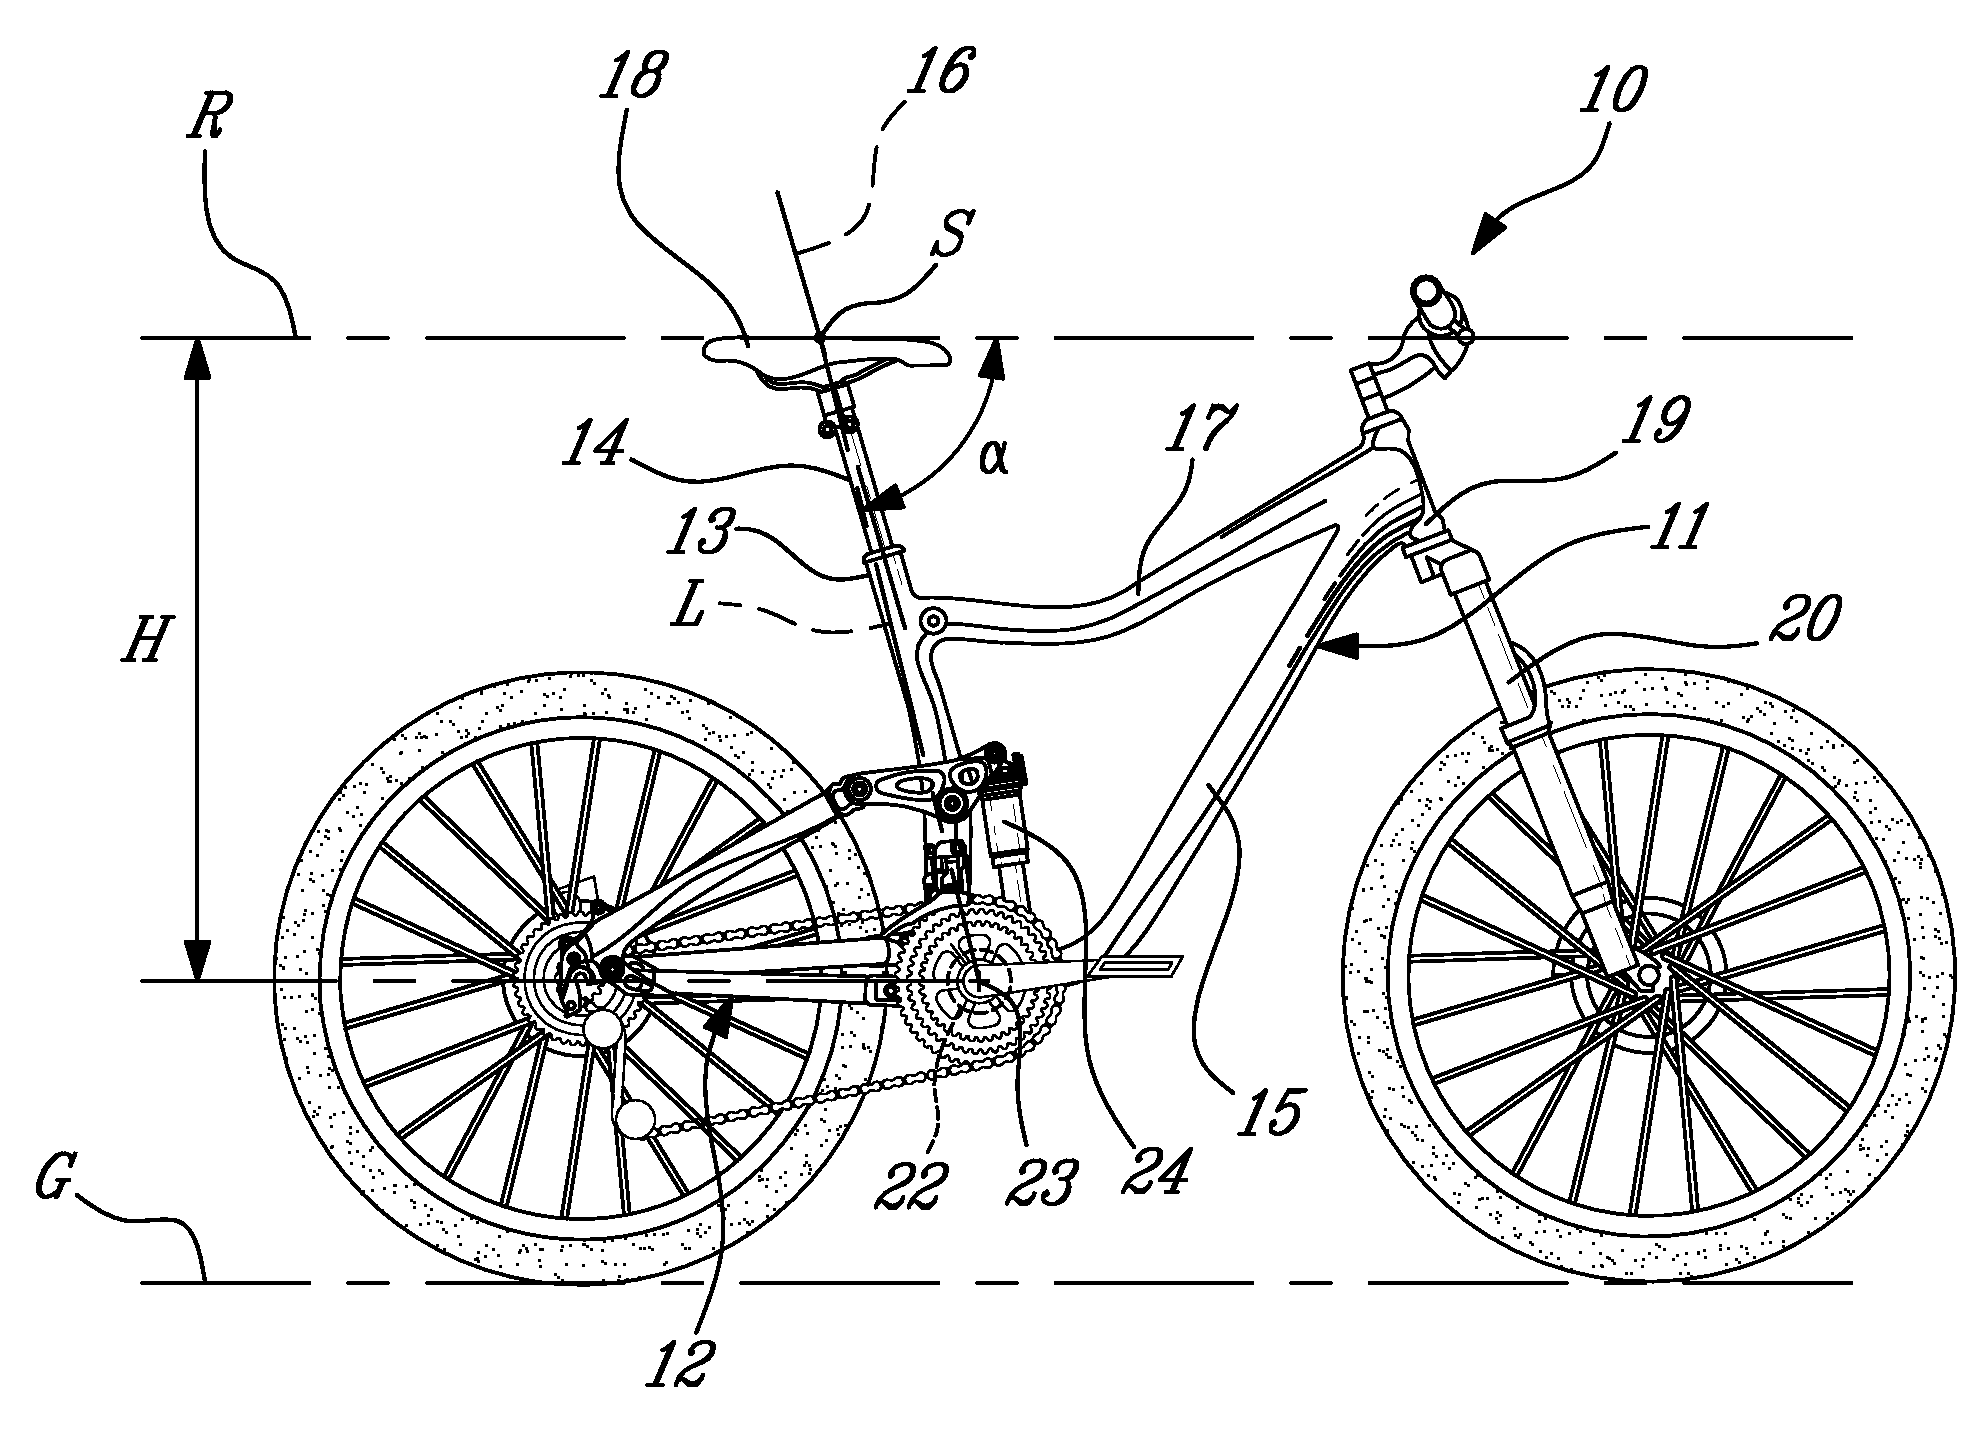 Mountain bicycle having improved frame geometry